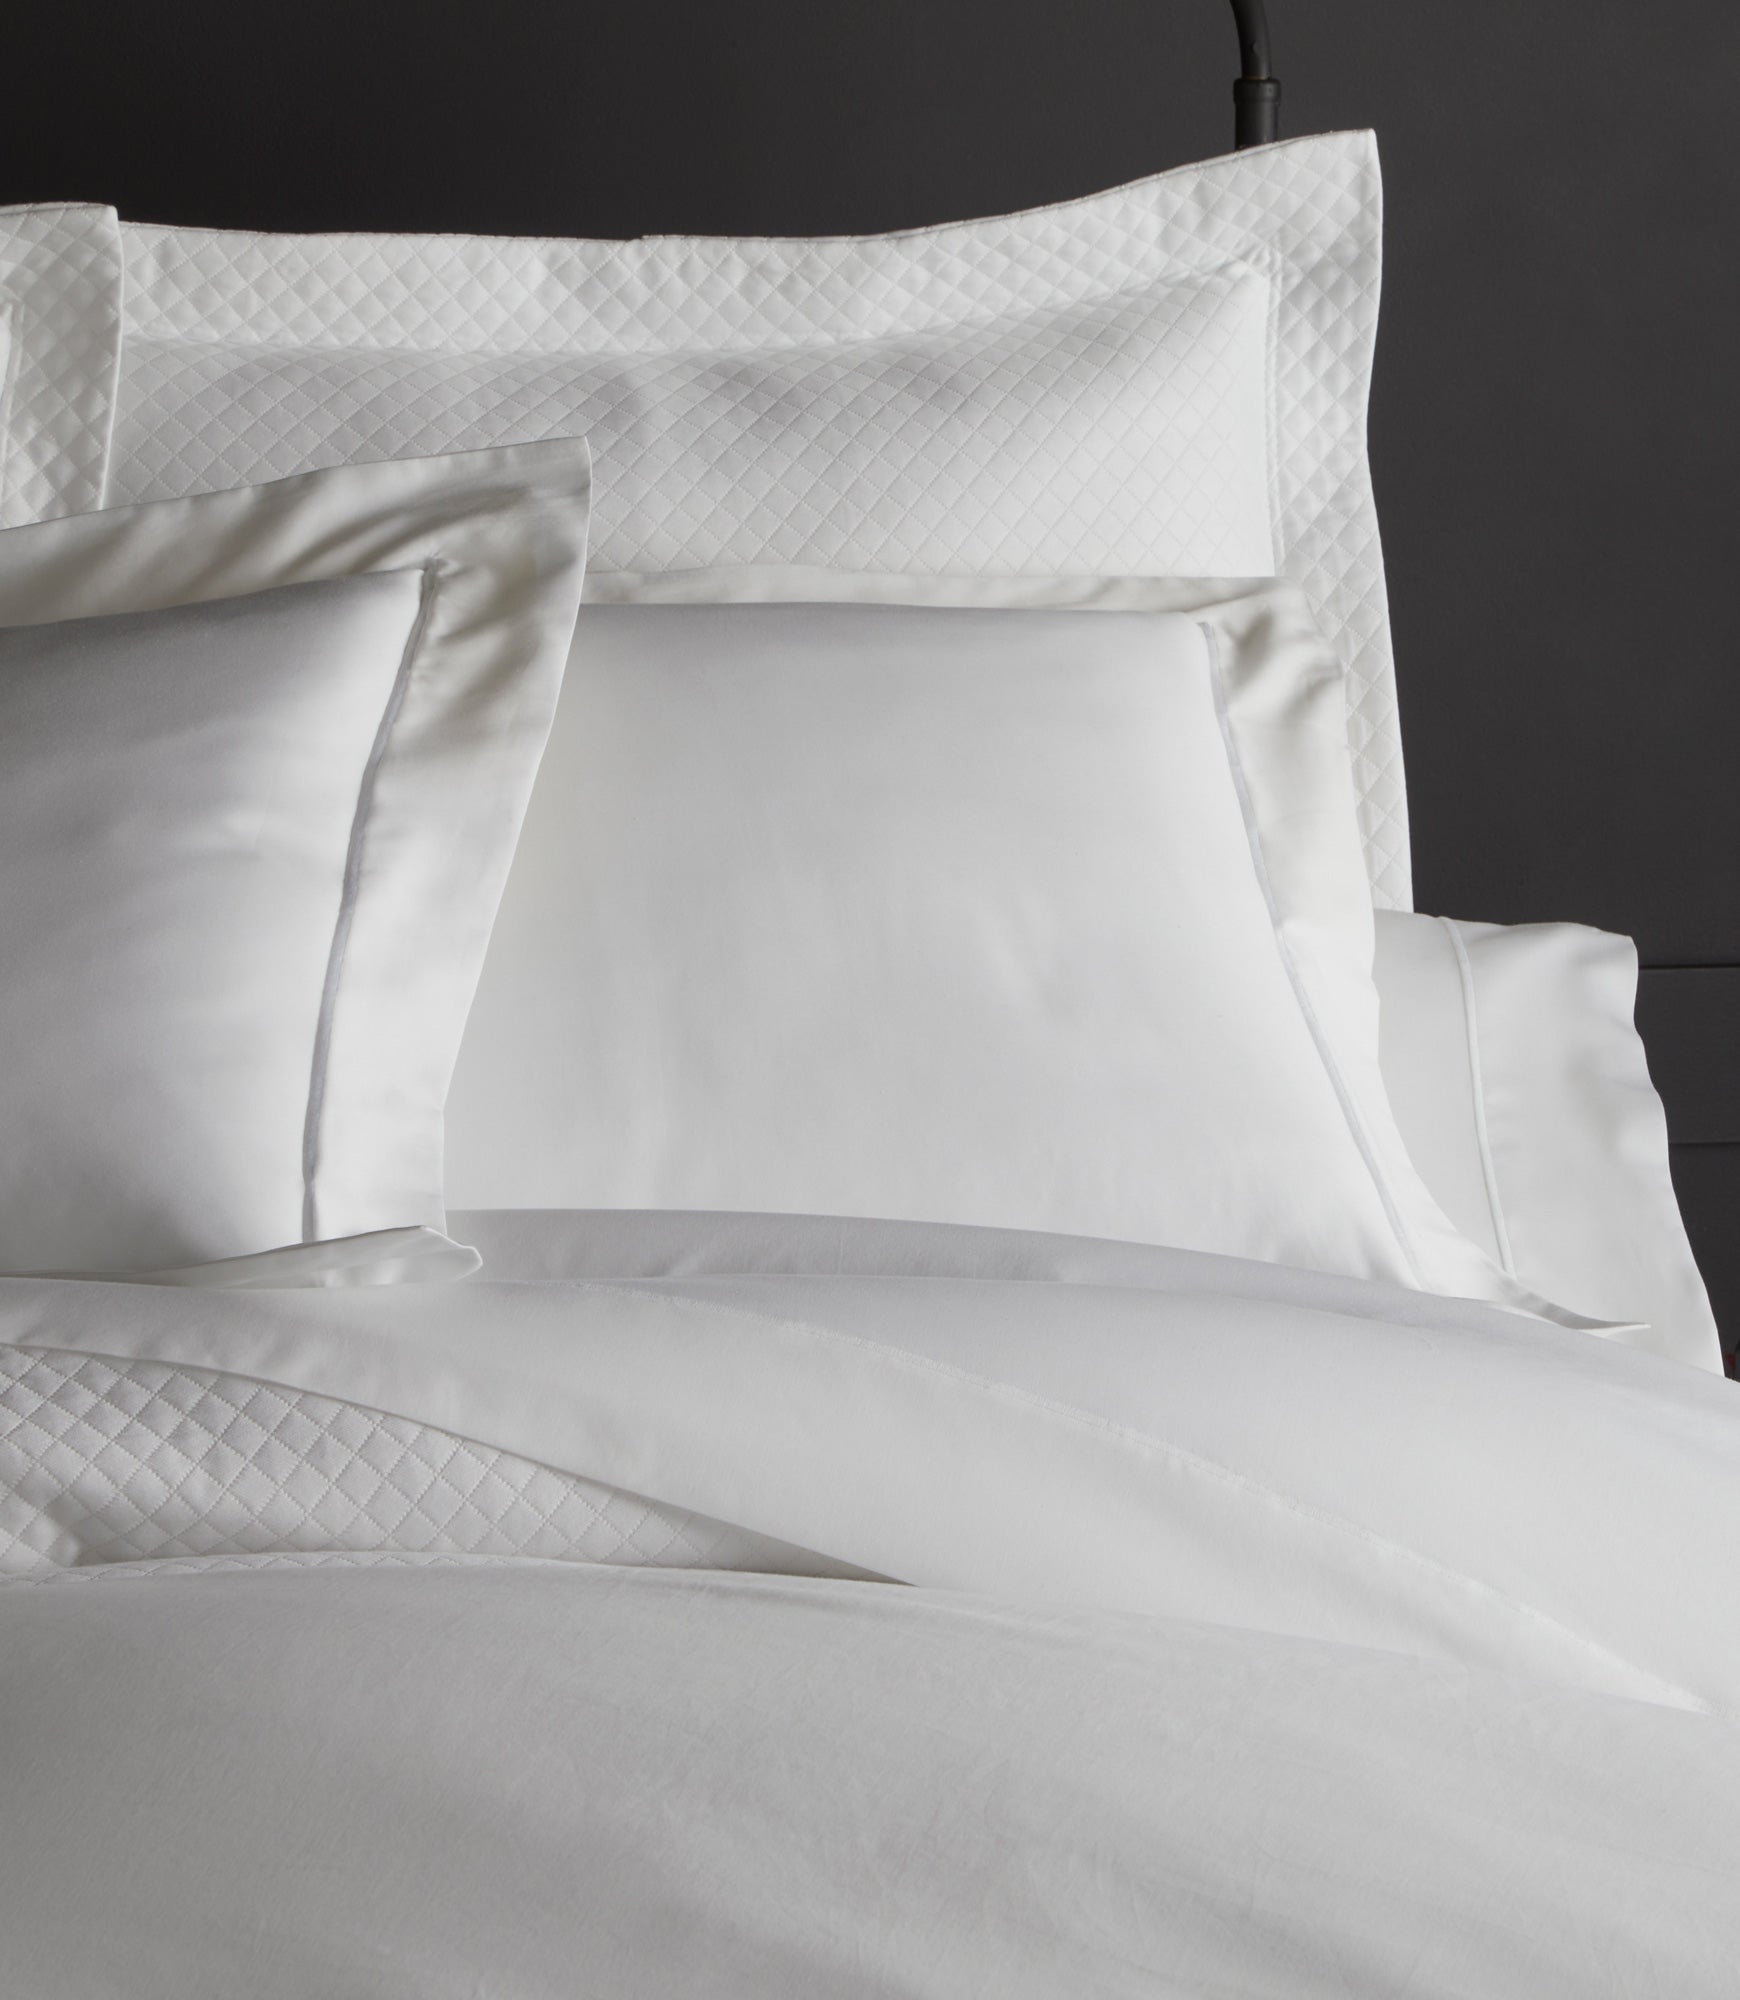 Oxford Sham in White Detail on Bed